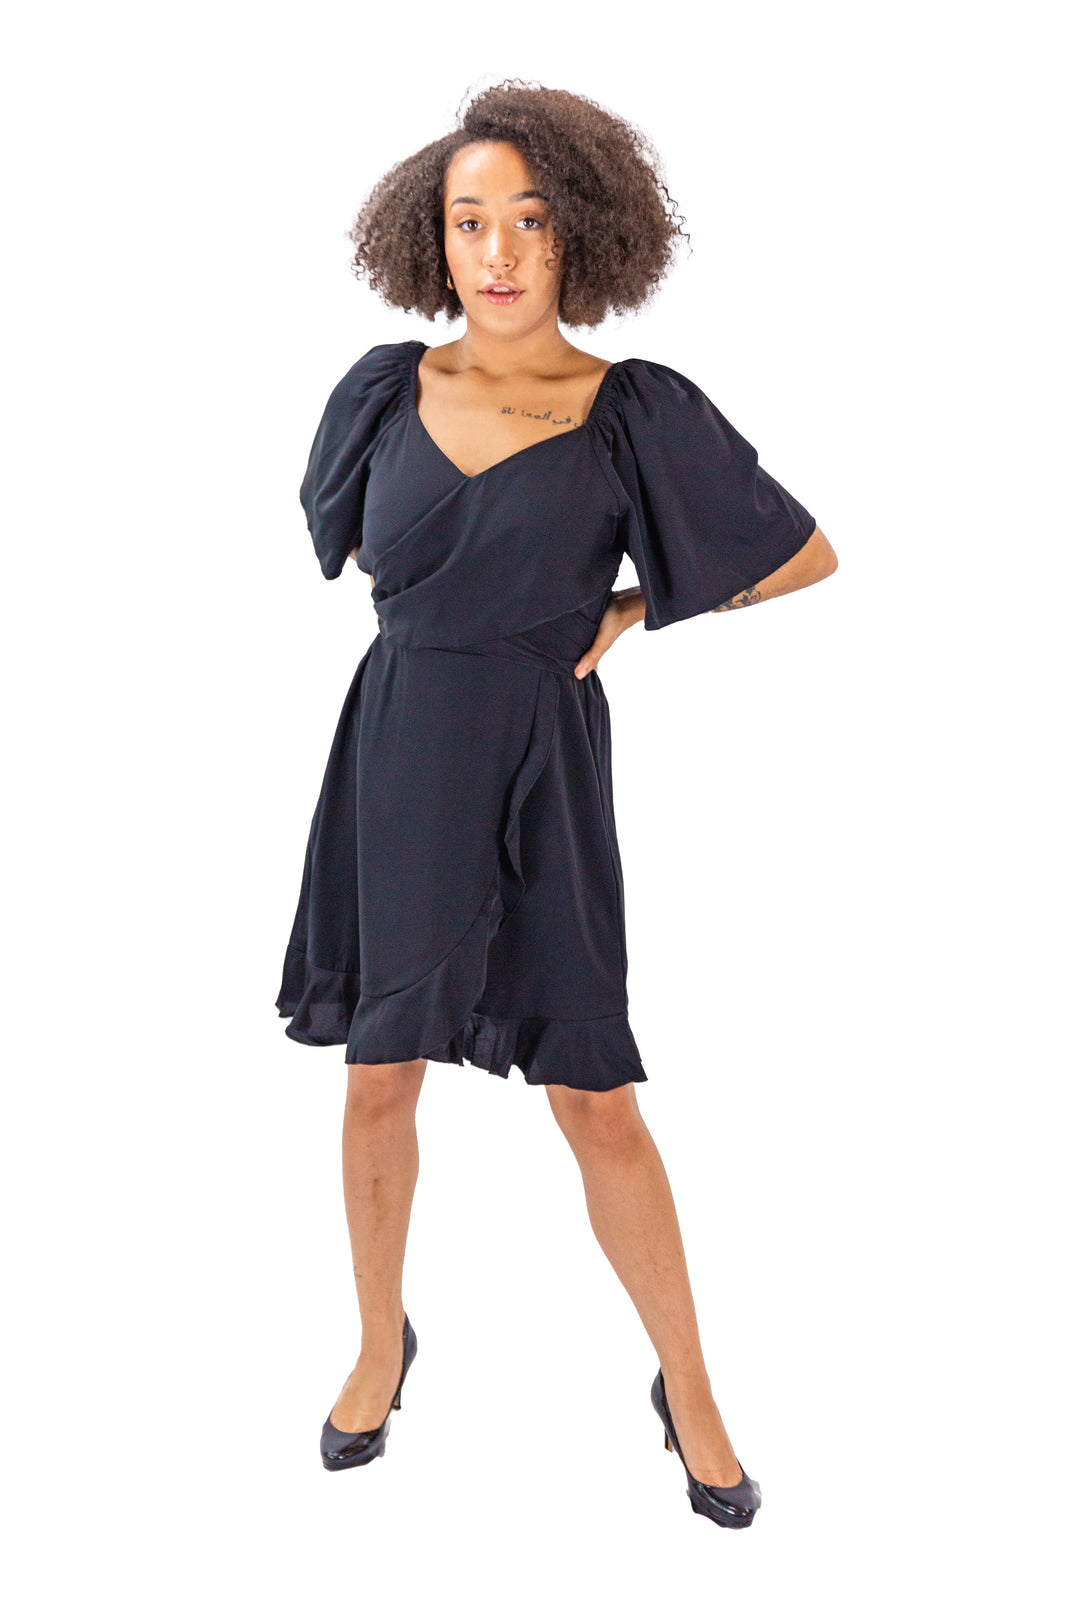 Fabonics Elegance Unveiled Black Evening Dress with Tie Back and Ruffle Hem for Stylish Event Wear